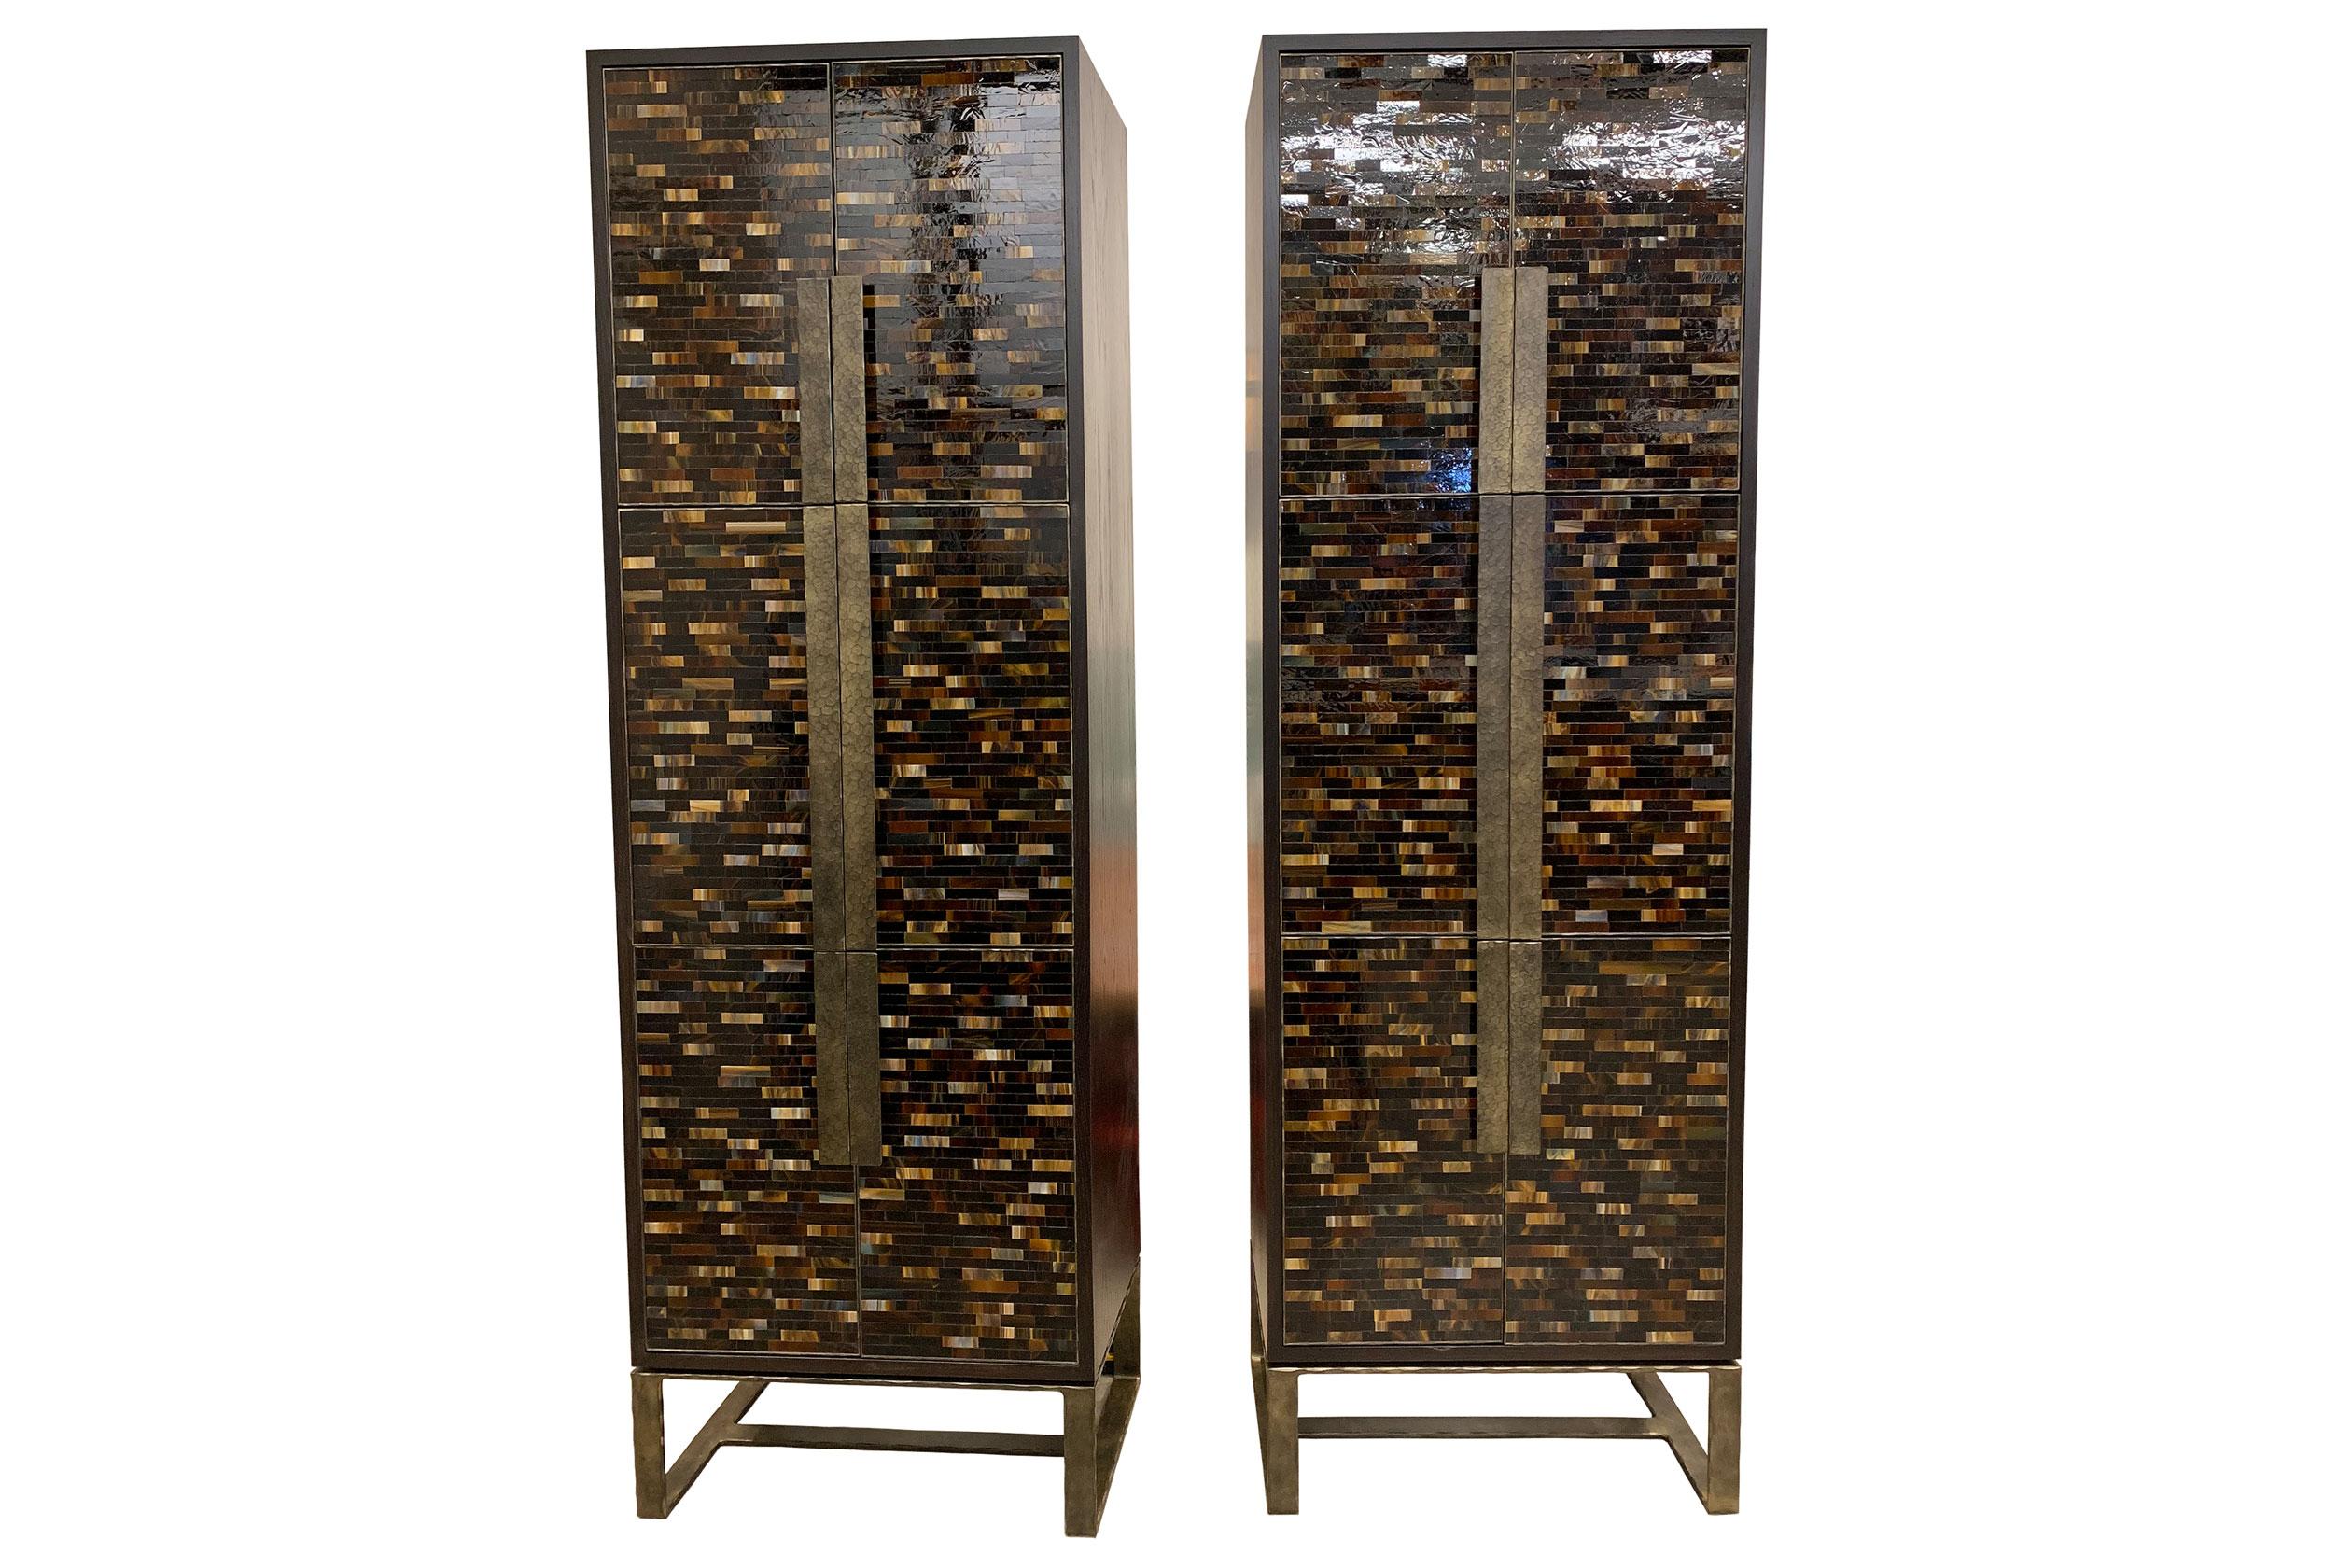 American Modern Chelsea Brown Glass Mosaic Bar with Hammered Metal Base by Ercole For Sale